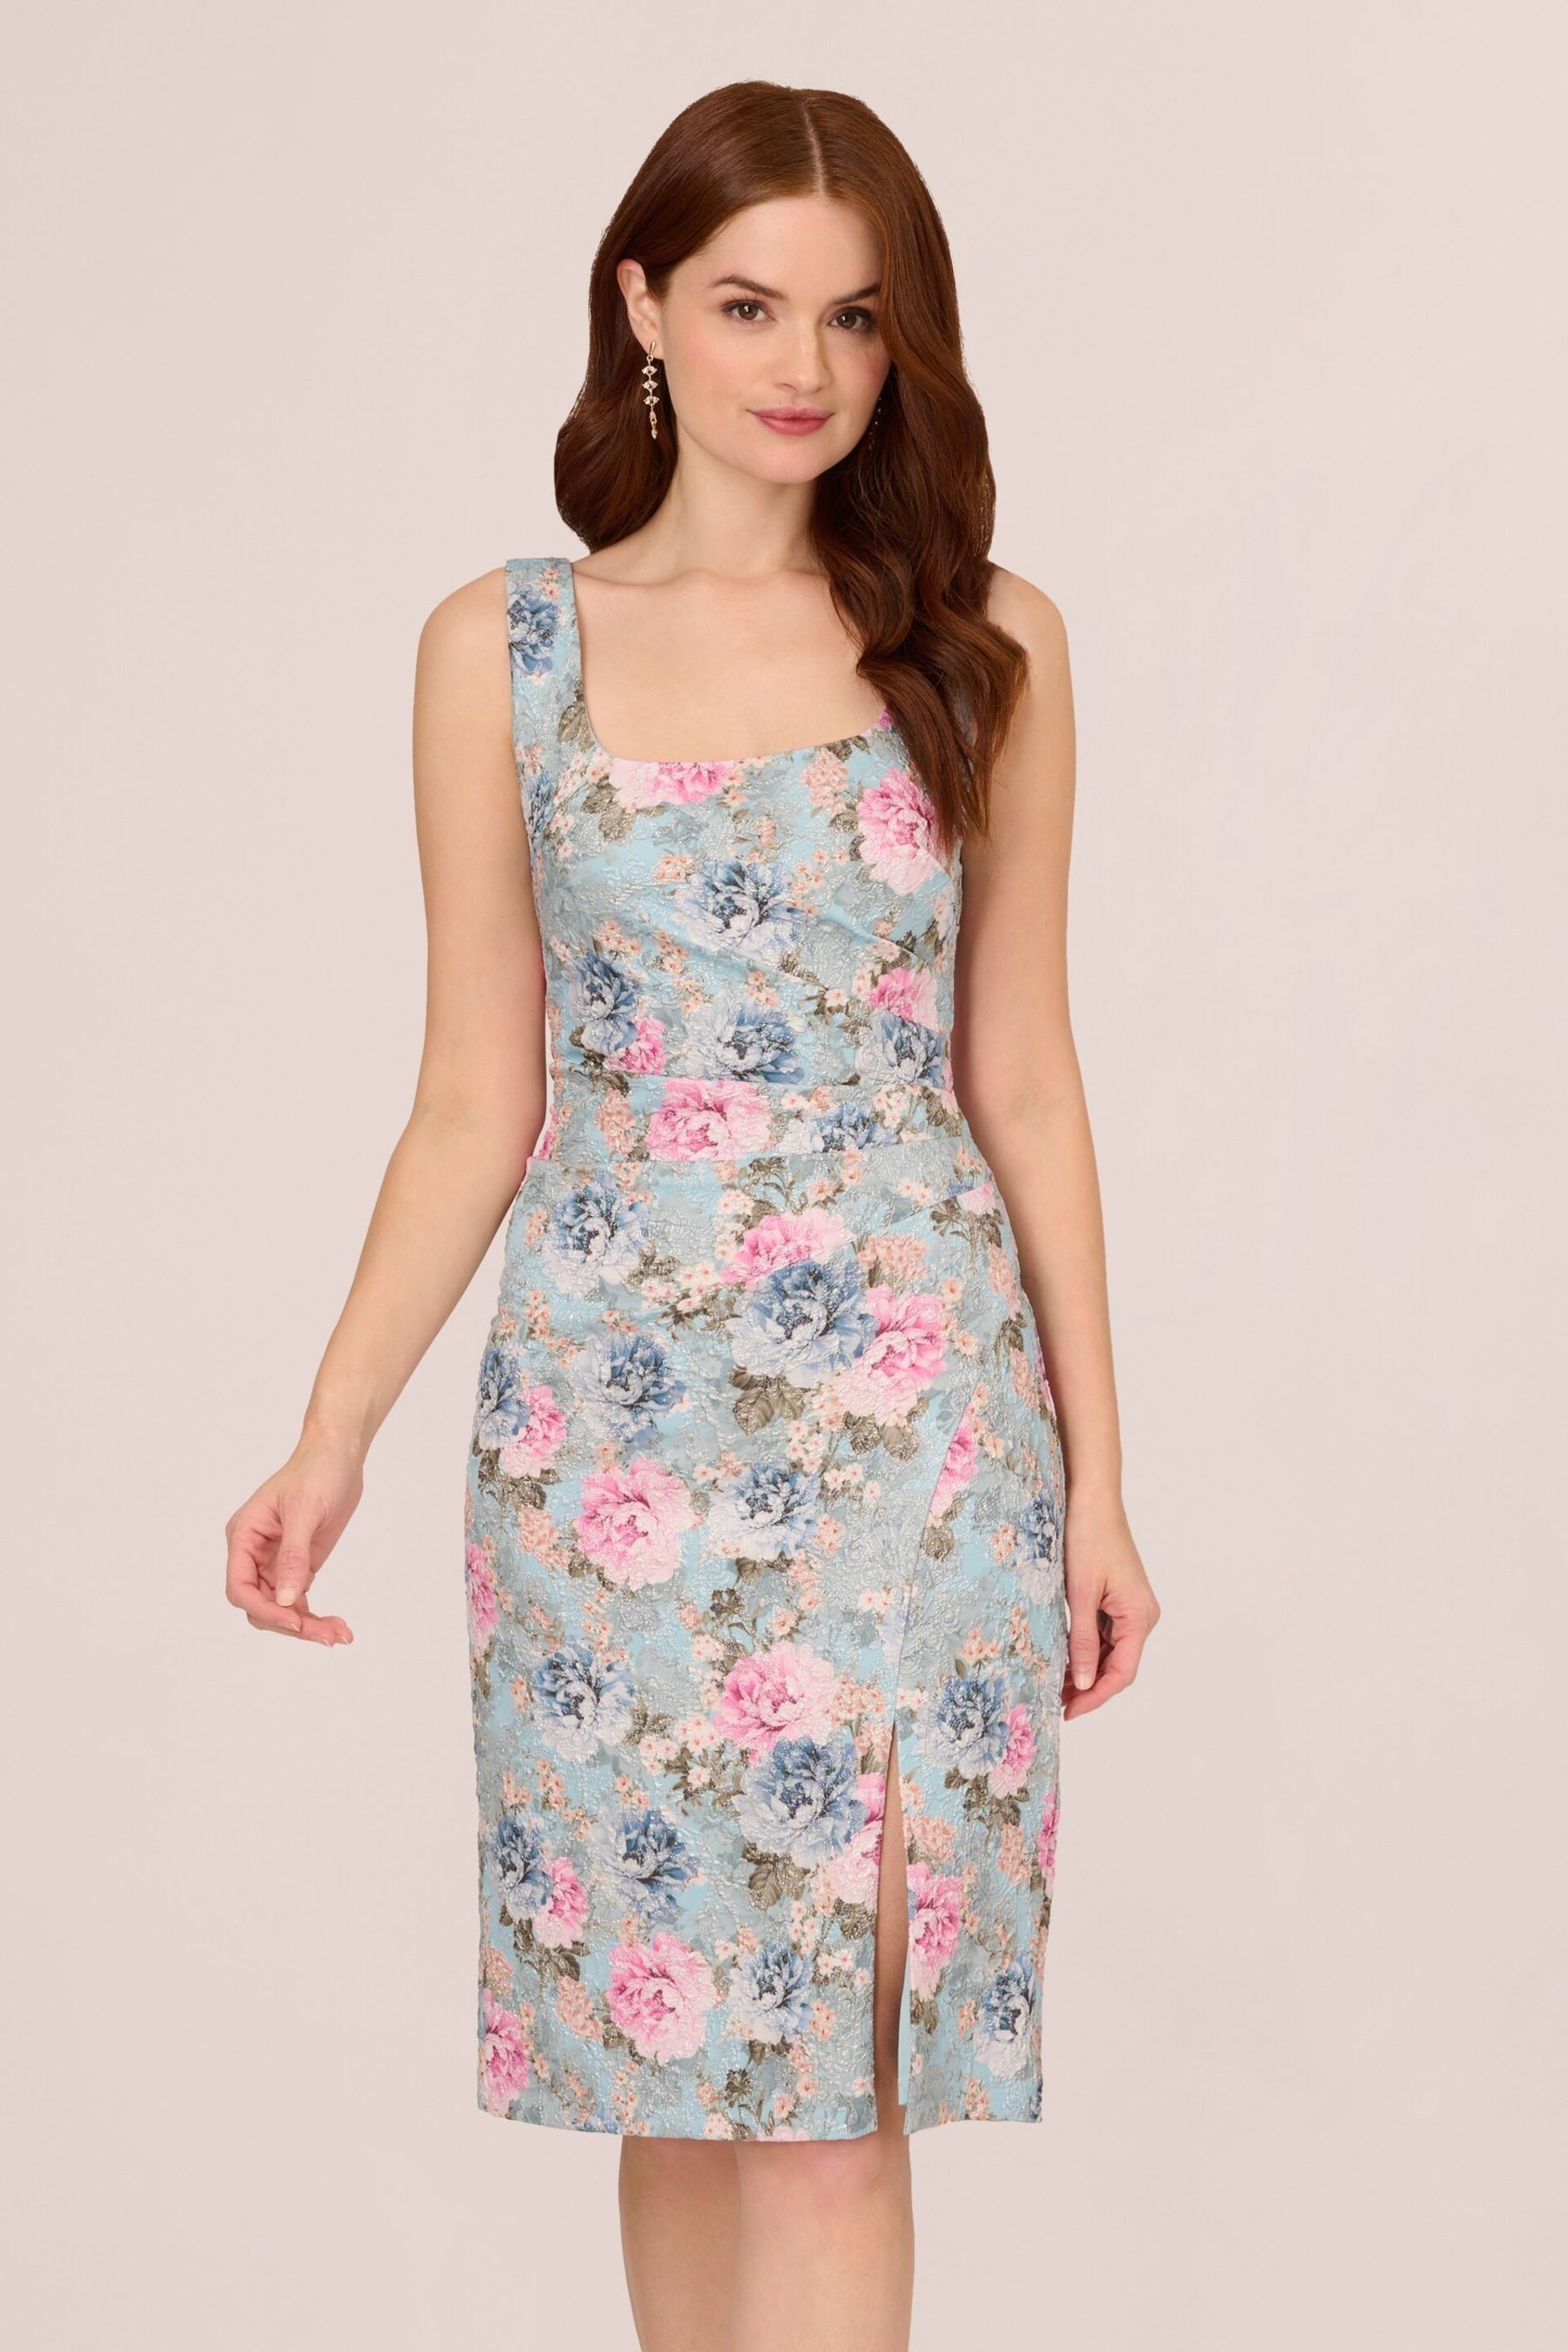 Adrianna Papell Blue Floral Matelasse Dress - Image 1 of 7